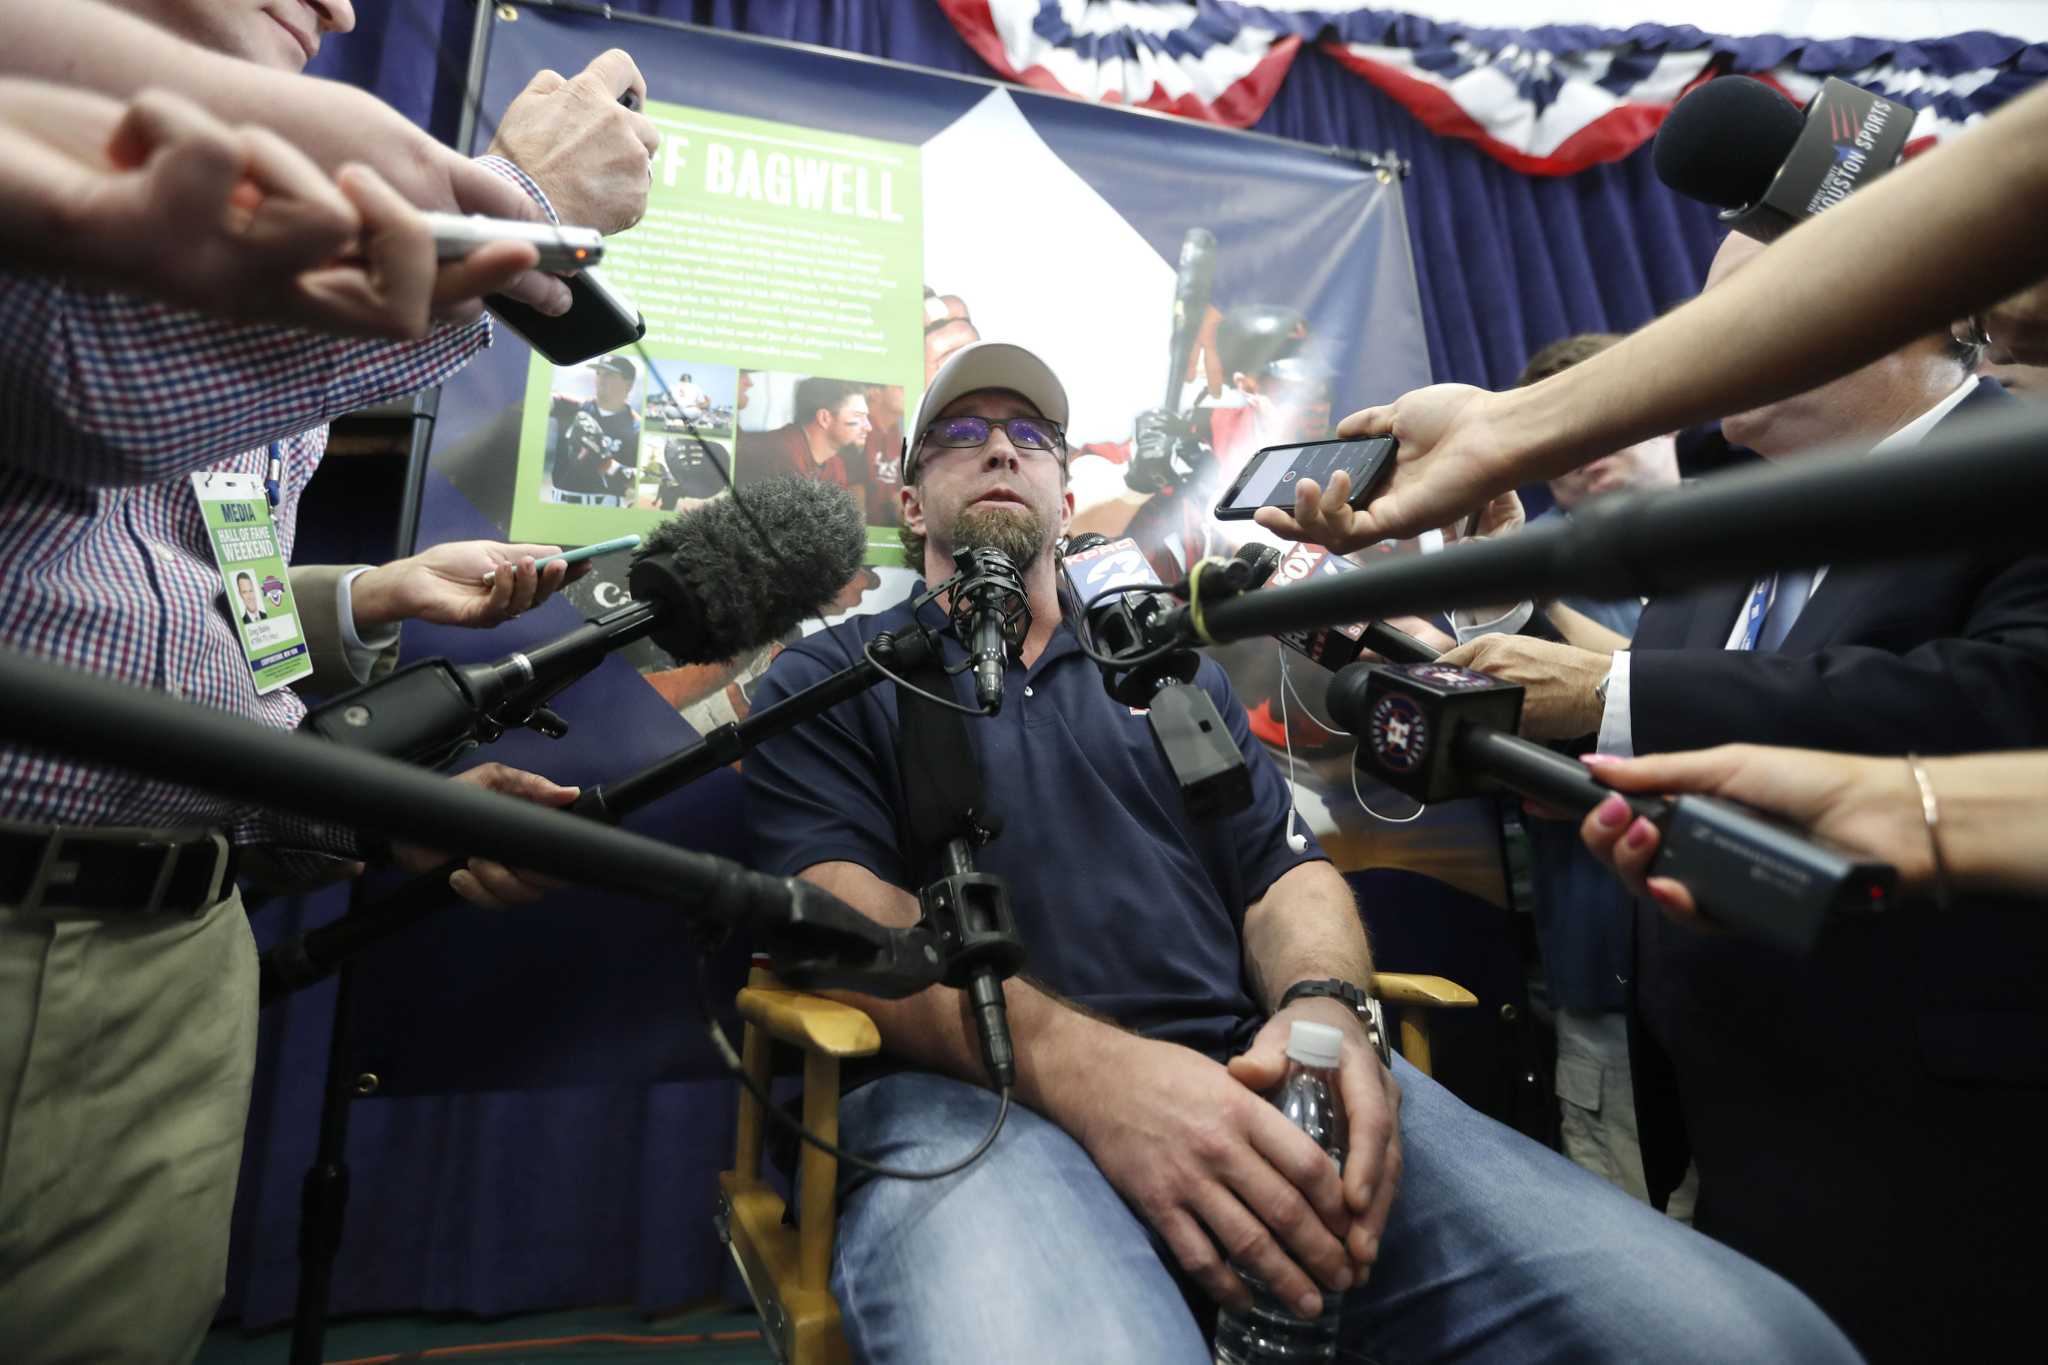 Jeff Bagwell, headed to Hall of Fame, proud of his Connecticut roots